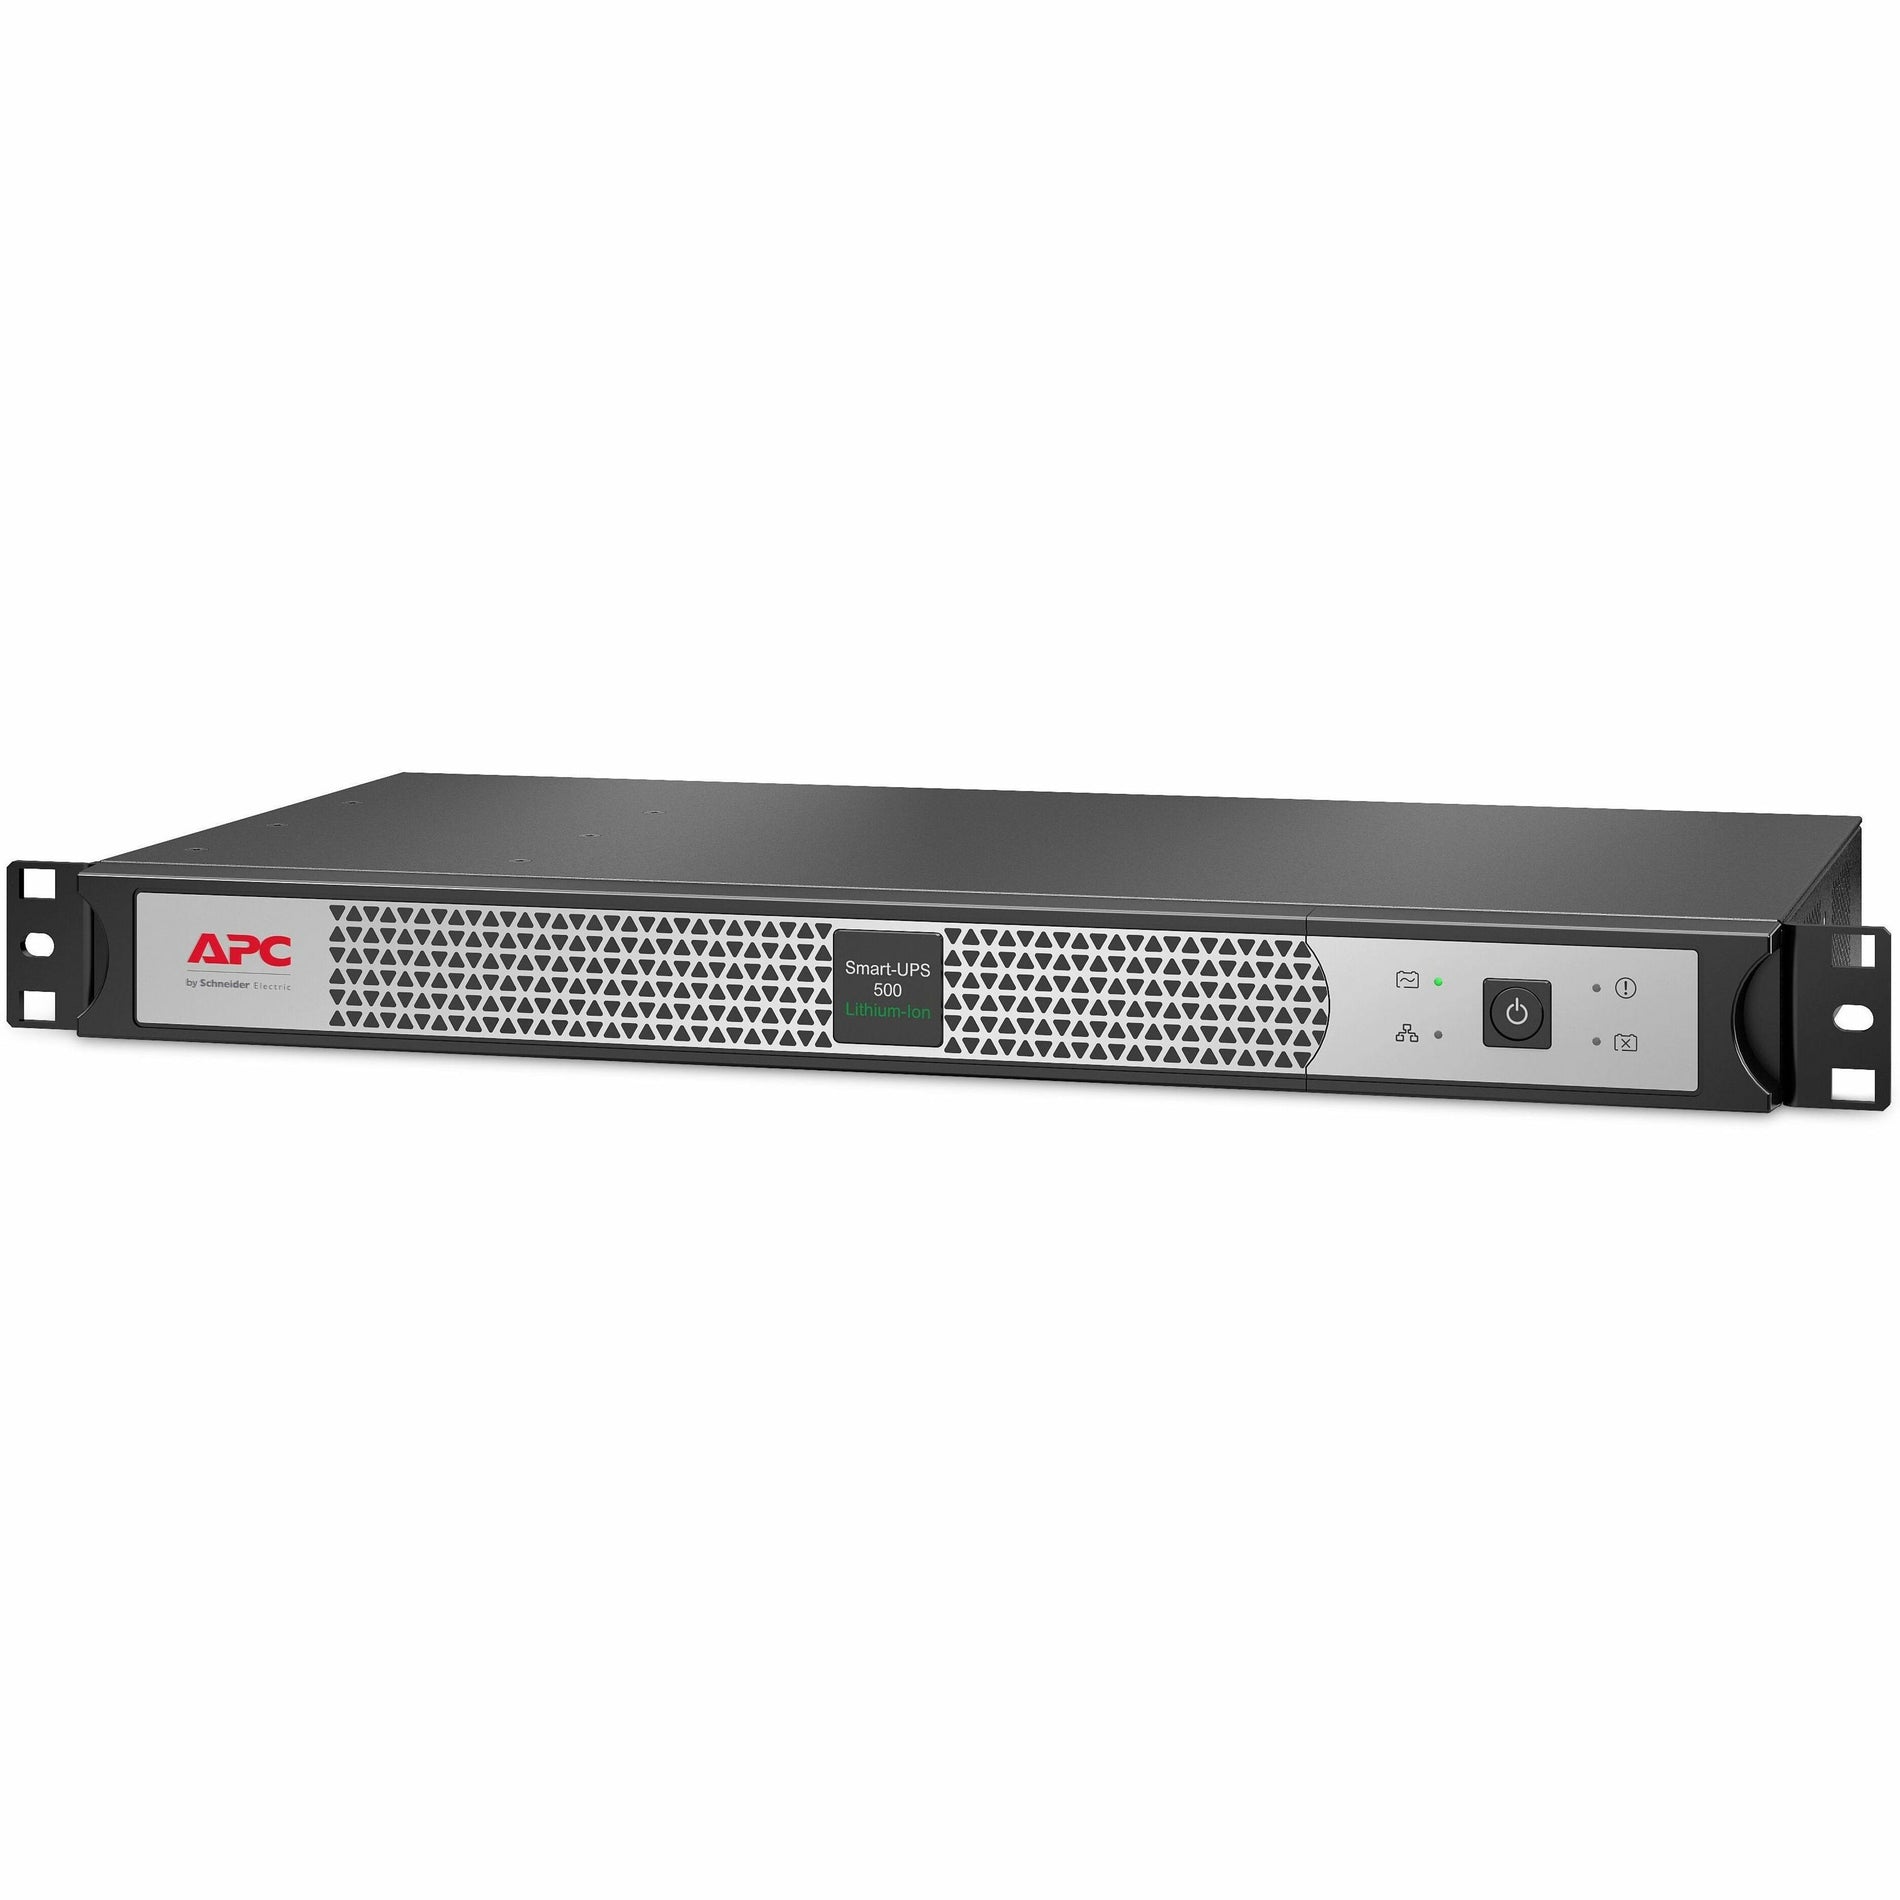 APC SCL500RM1UNC Smart-UPS 500VA Rack-mountable UPS, 5 Year Warranty, Energy Star, USB and Serial Port, 120V AC Input Voltage, 500 VA/400 W Load Capacity, Lithium Ion Battery, 2.70 Minute Backup/Run Time